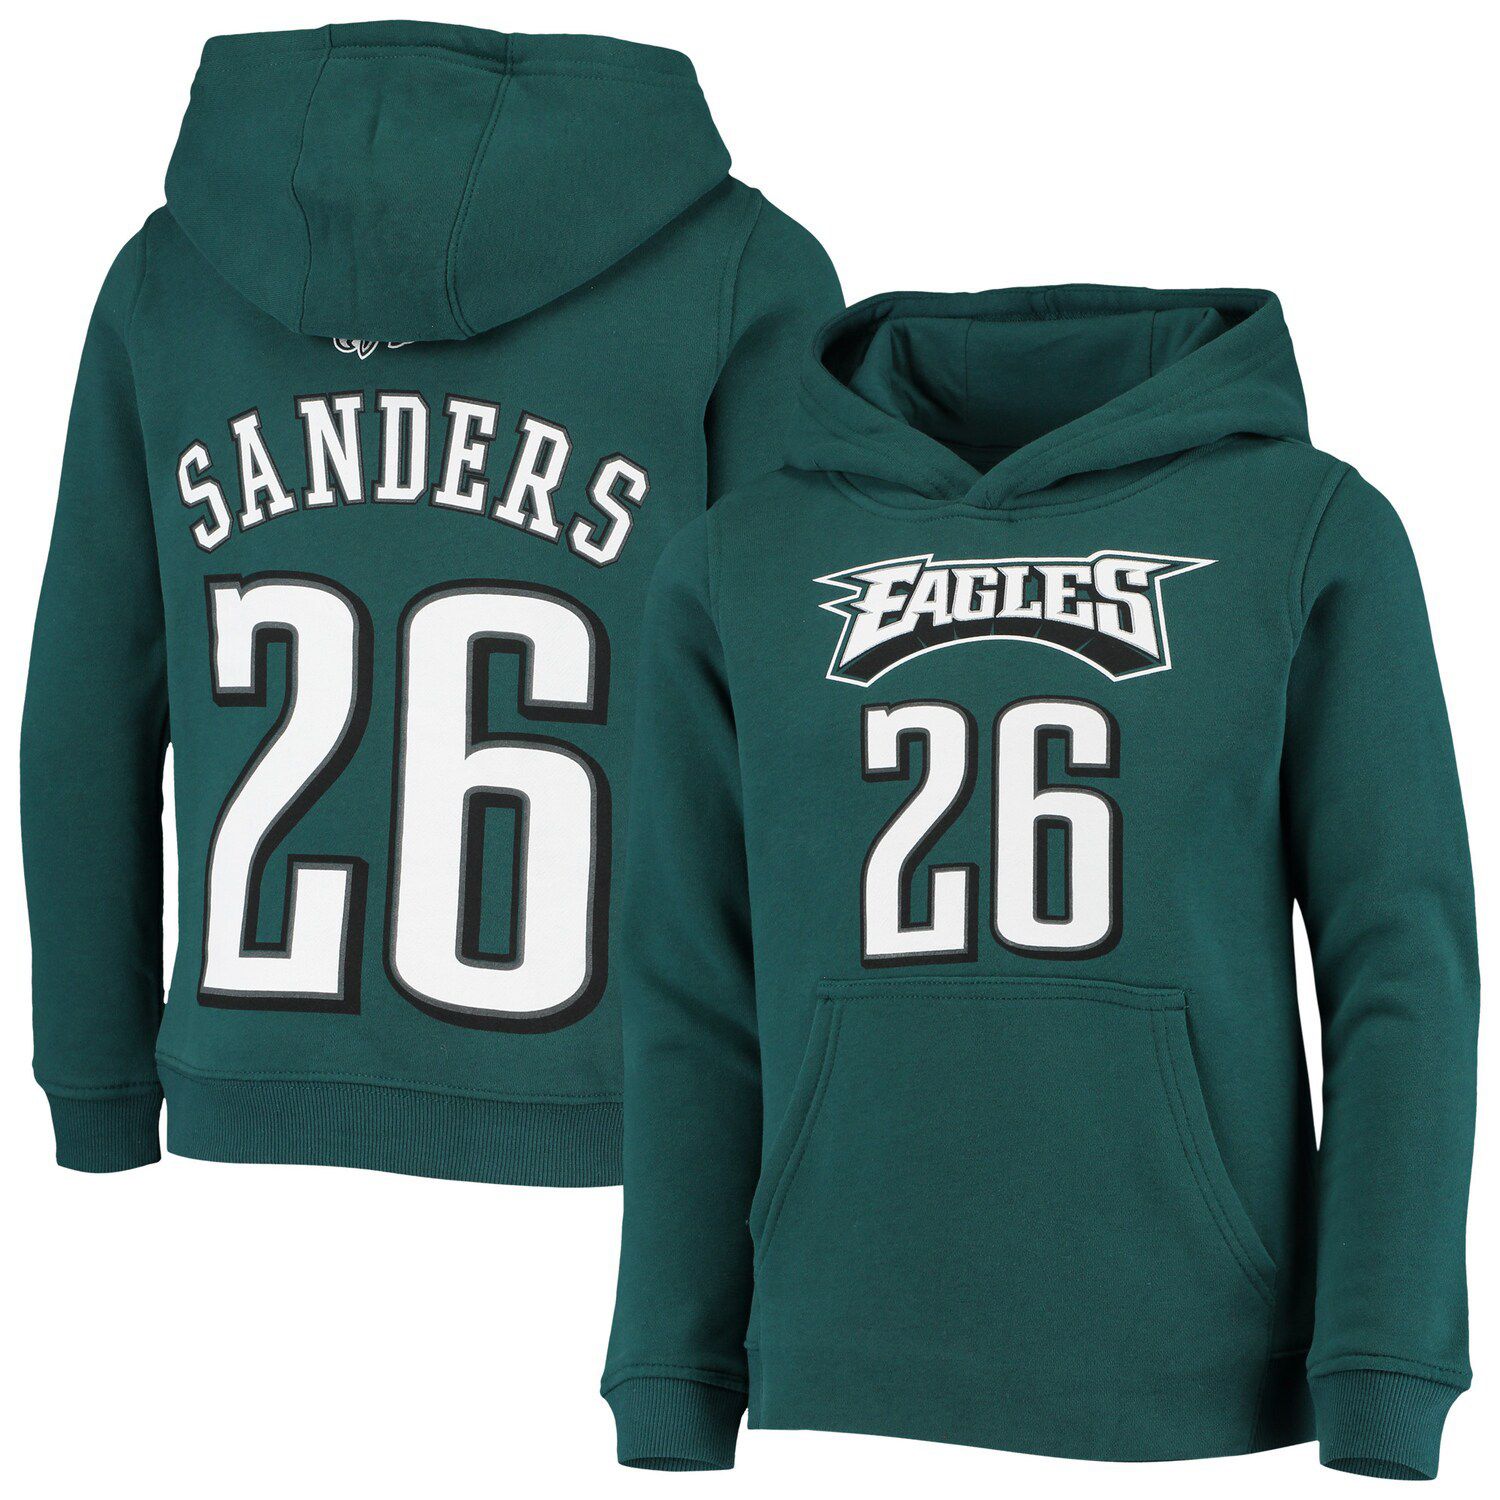 miles sanders youth jersey